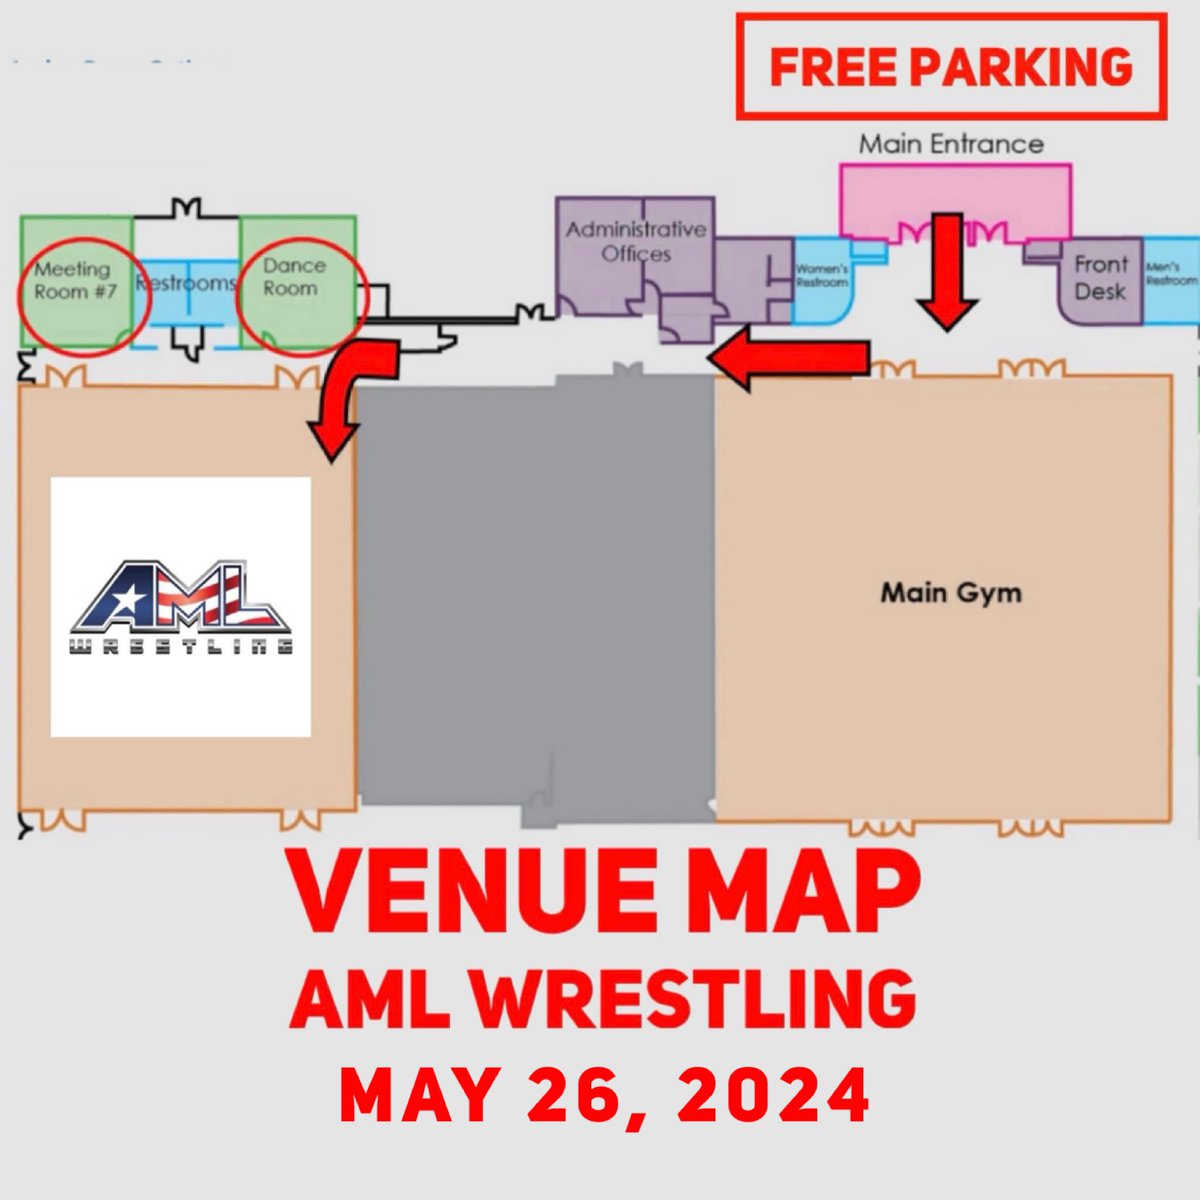 🚨 ATTN: here is the venue map for AML Wrestling on Sunday, May 26, 2024. We are in the auxiliary gym for this event but parking & the entrance are the same for both gyms. Davie County Community Park Gym 151 Southwood Drive Mocksville, NC 👉 AMLWrestling.com